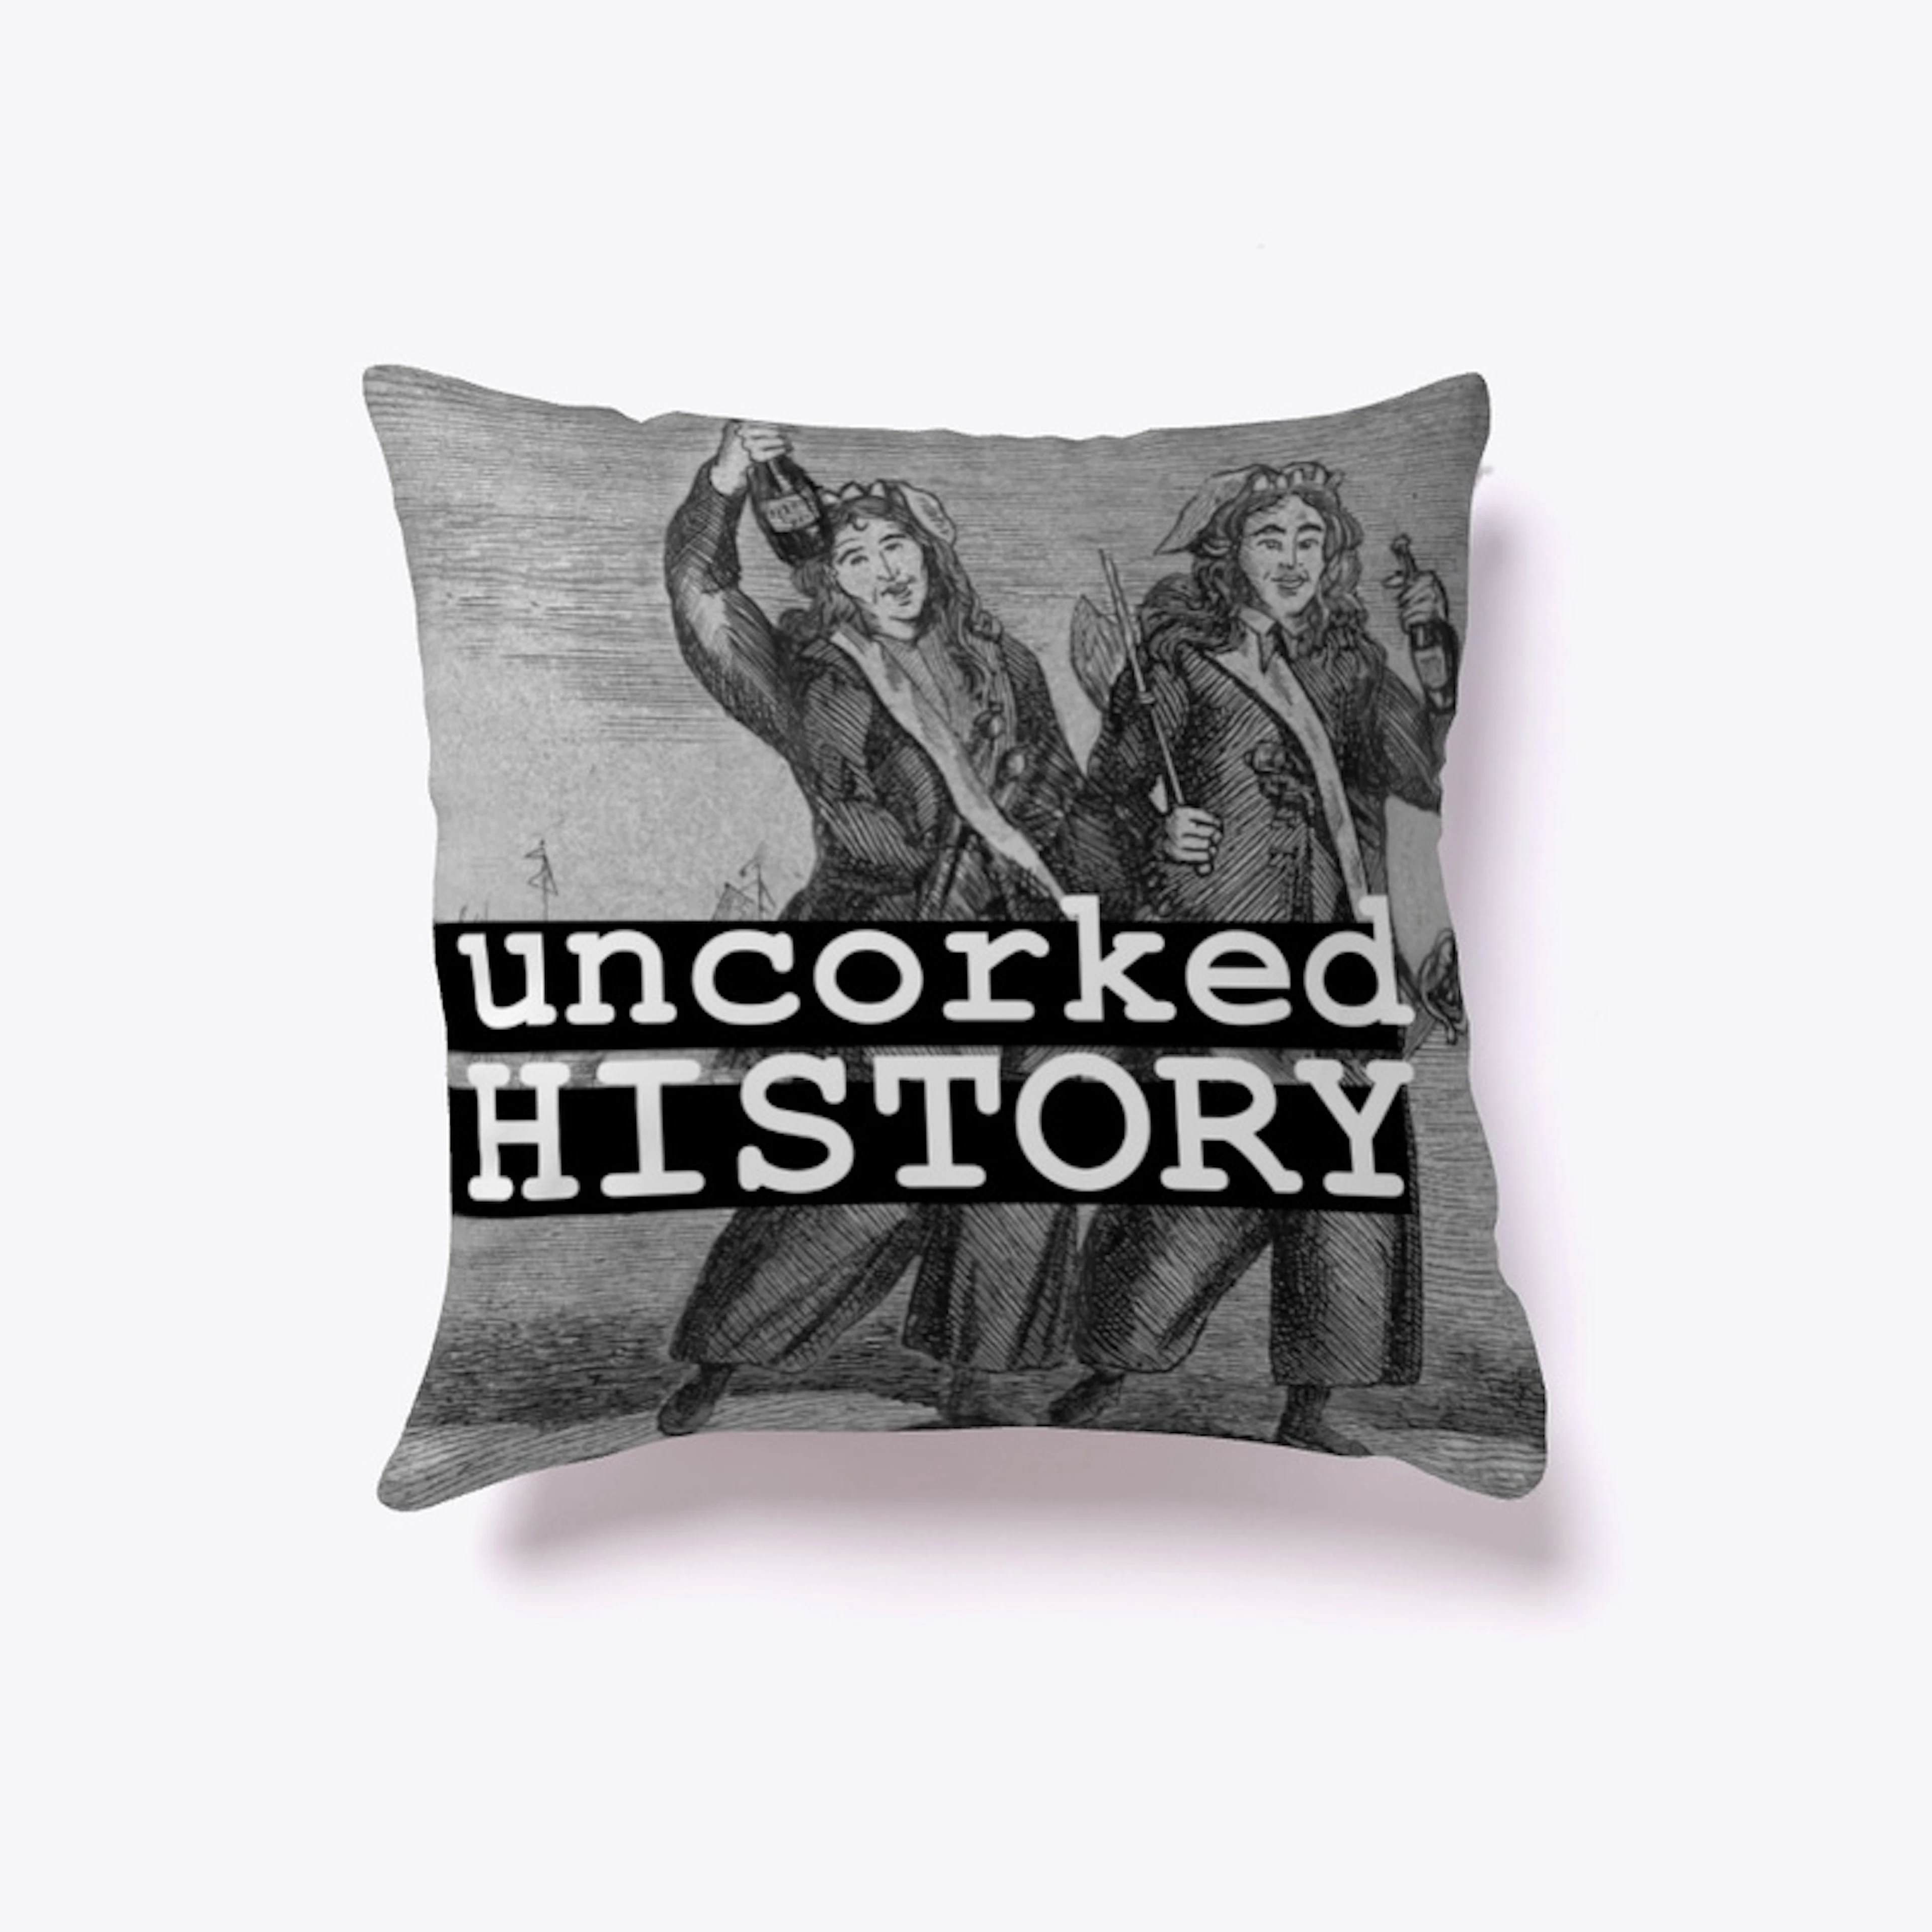 Uncorked History